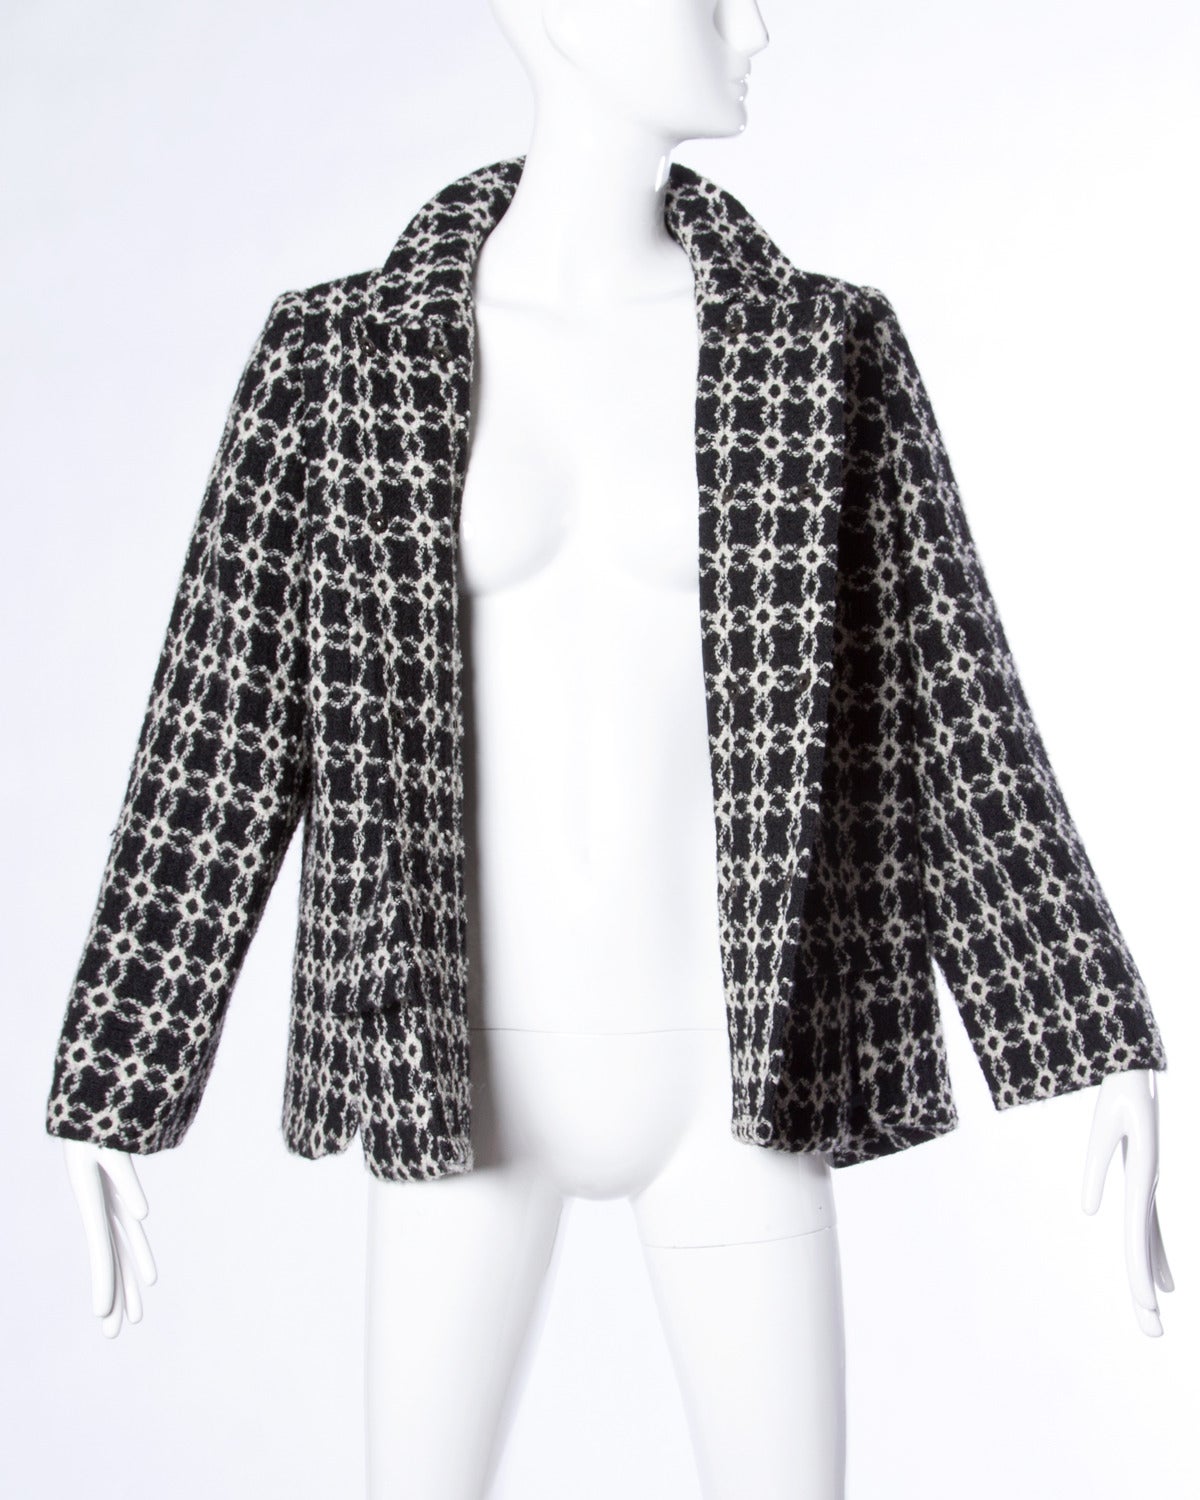 Beautiful vintage boxy cut double breasted jacket in a black and white geometric pattern by Pierre Cardin. Black silk lining and front flap pockets.

Details:

Fully Lined
Front Pockets
Front Snap Closure
Estimated Size: M-L
Color: Black/